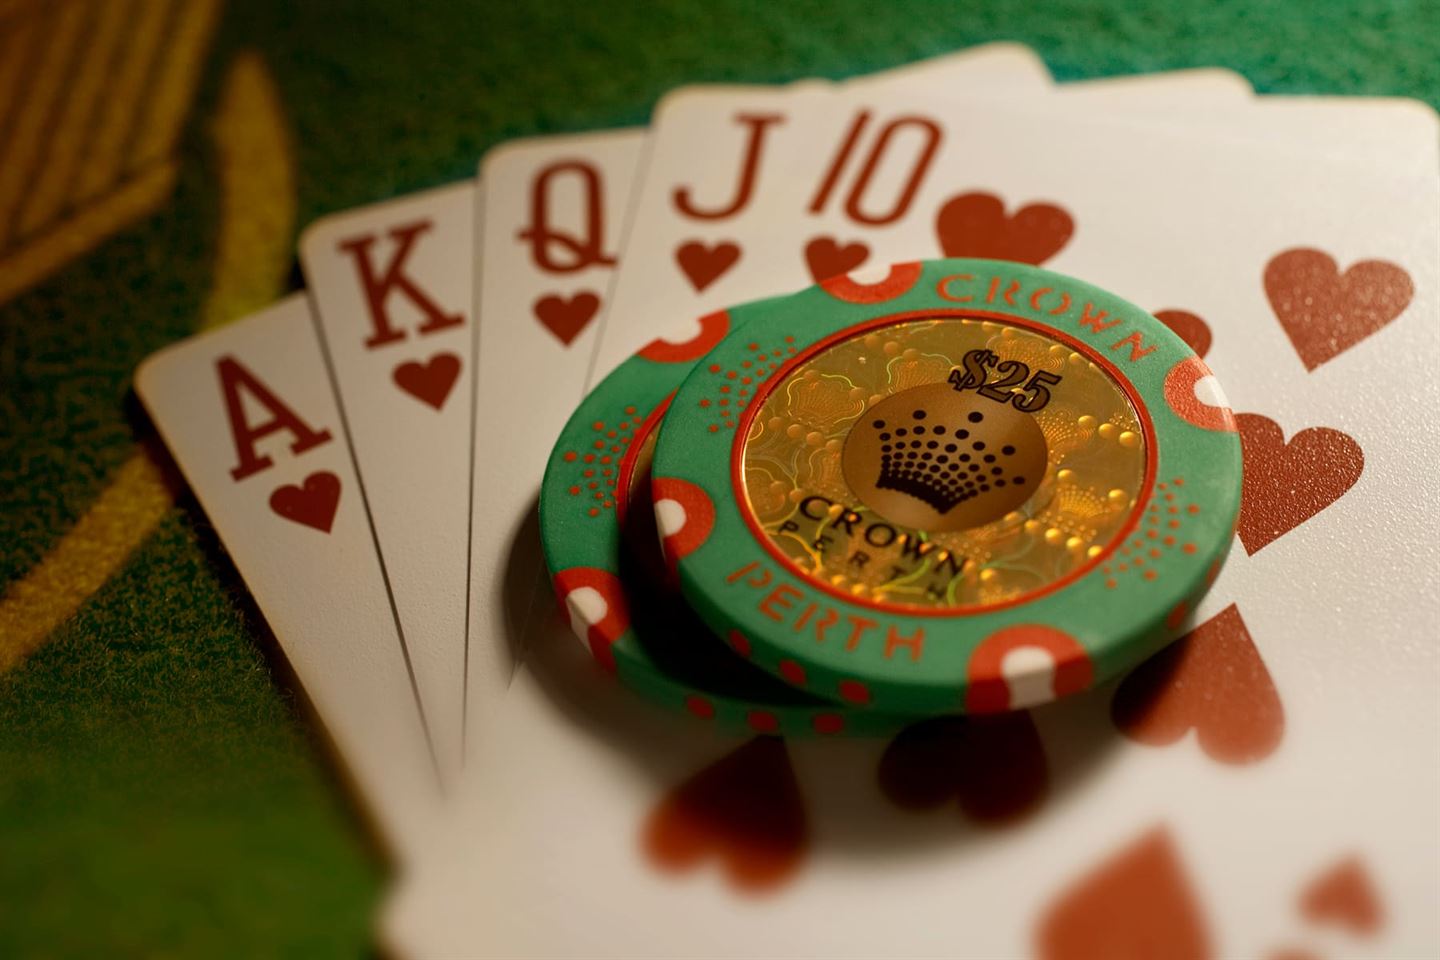 The Flop Unveiled: Unraveling the First Community Cards in Poker Rules